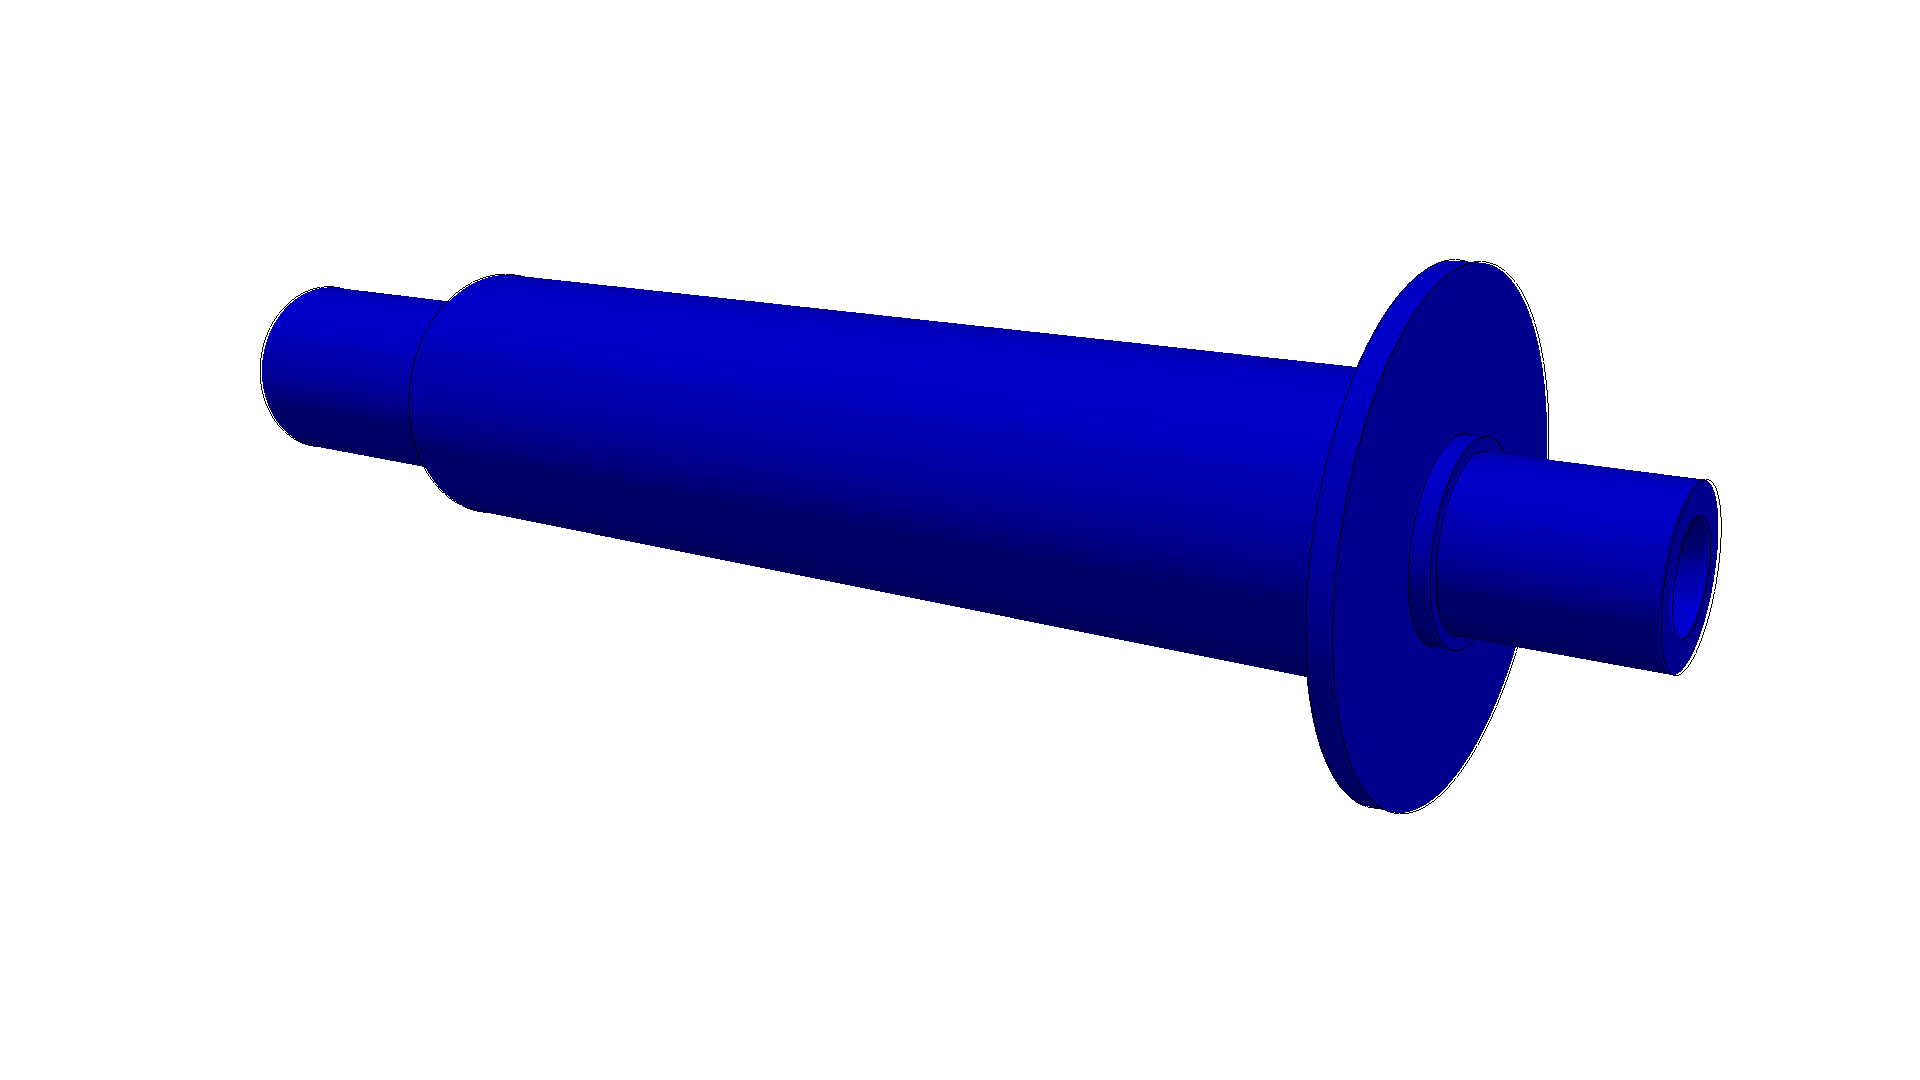 First natural mode: bending, FEA of a spindle by Carbomech with SimScale